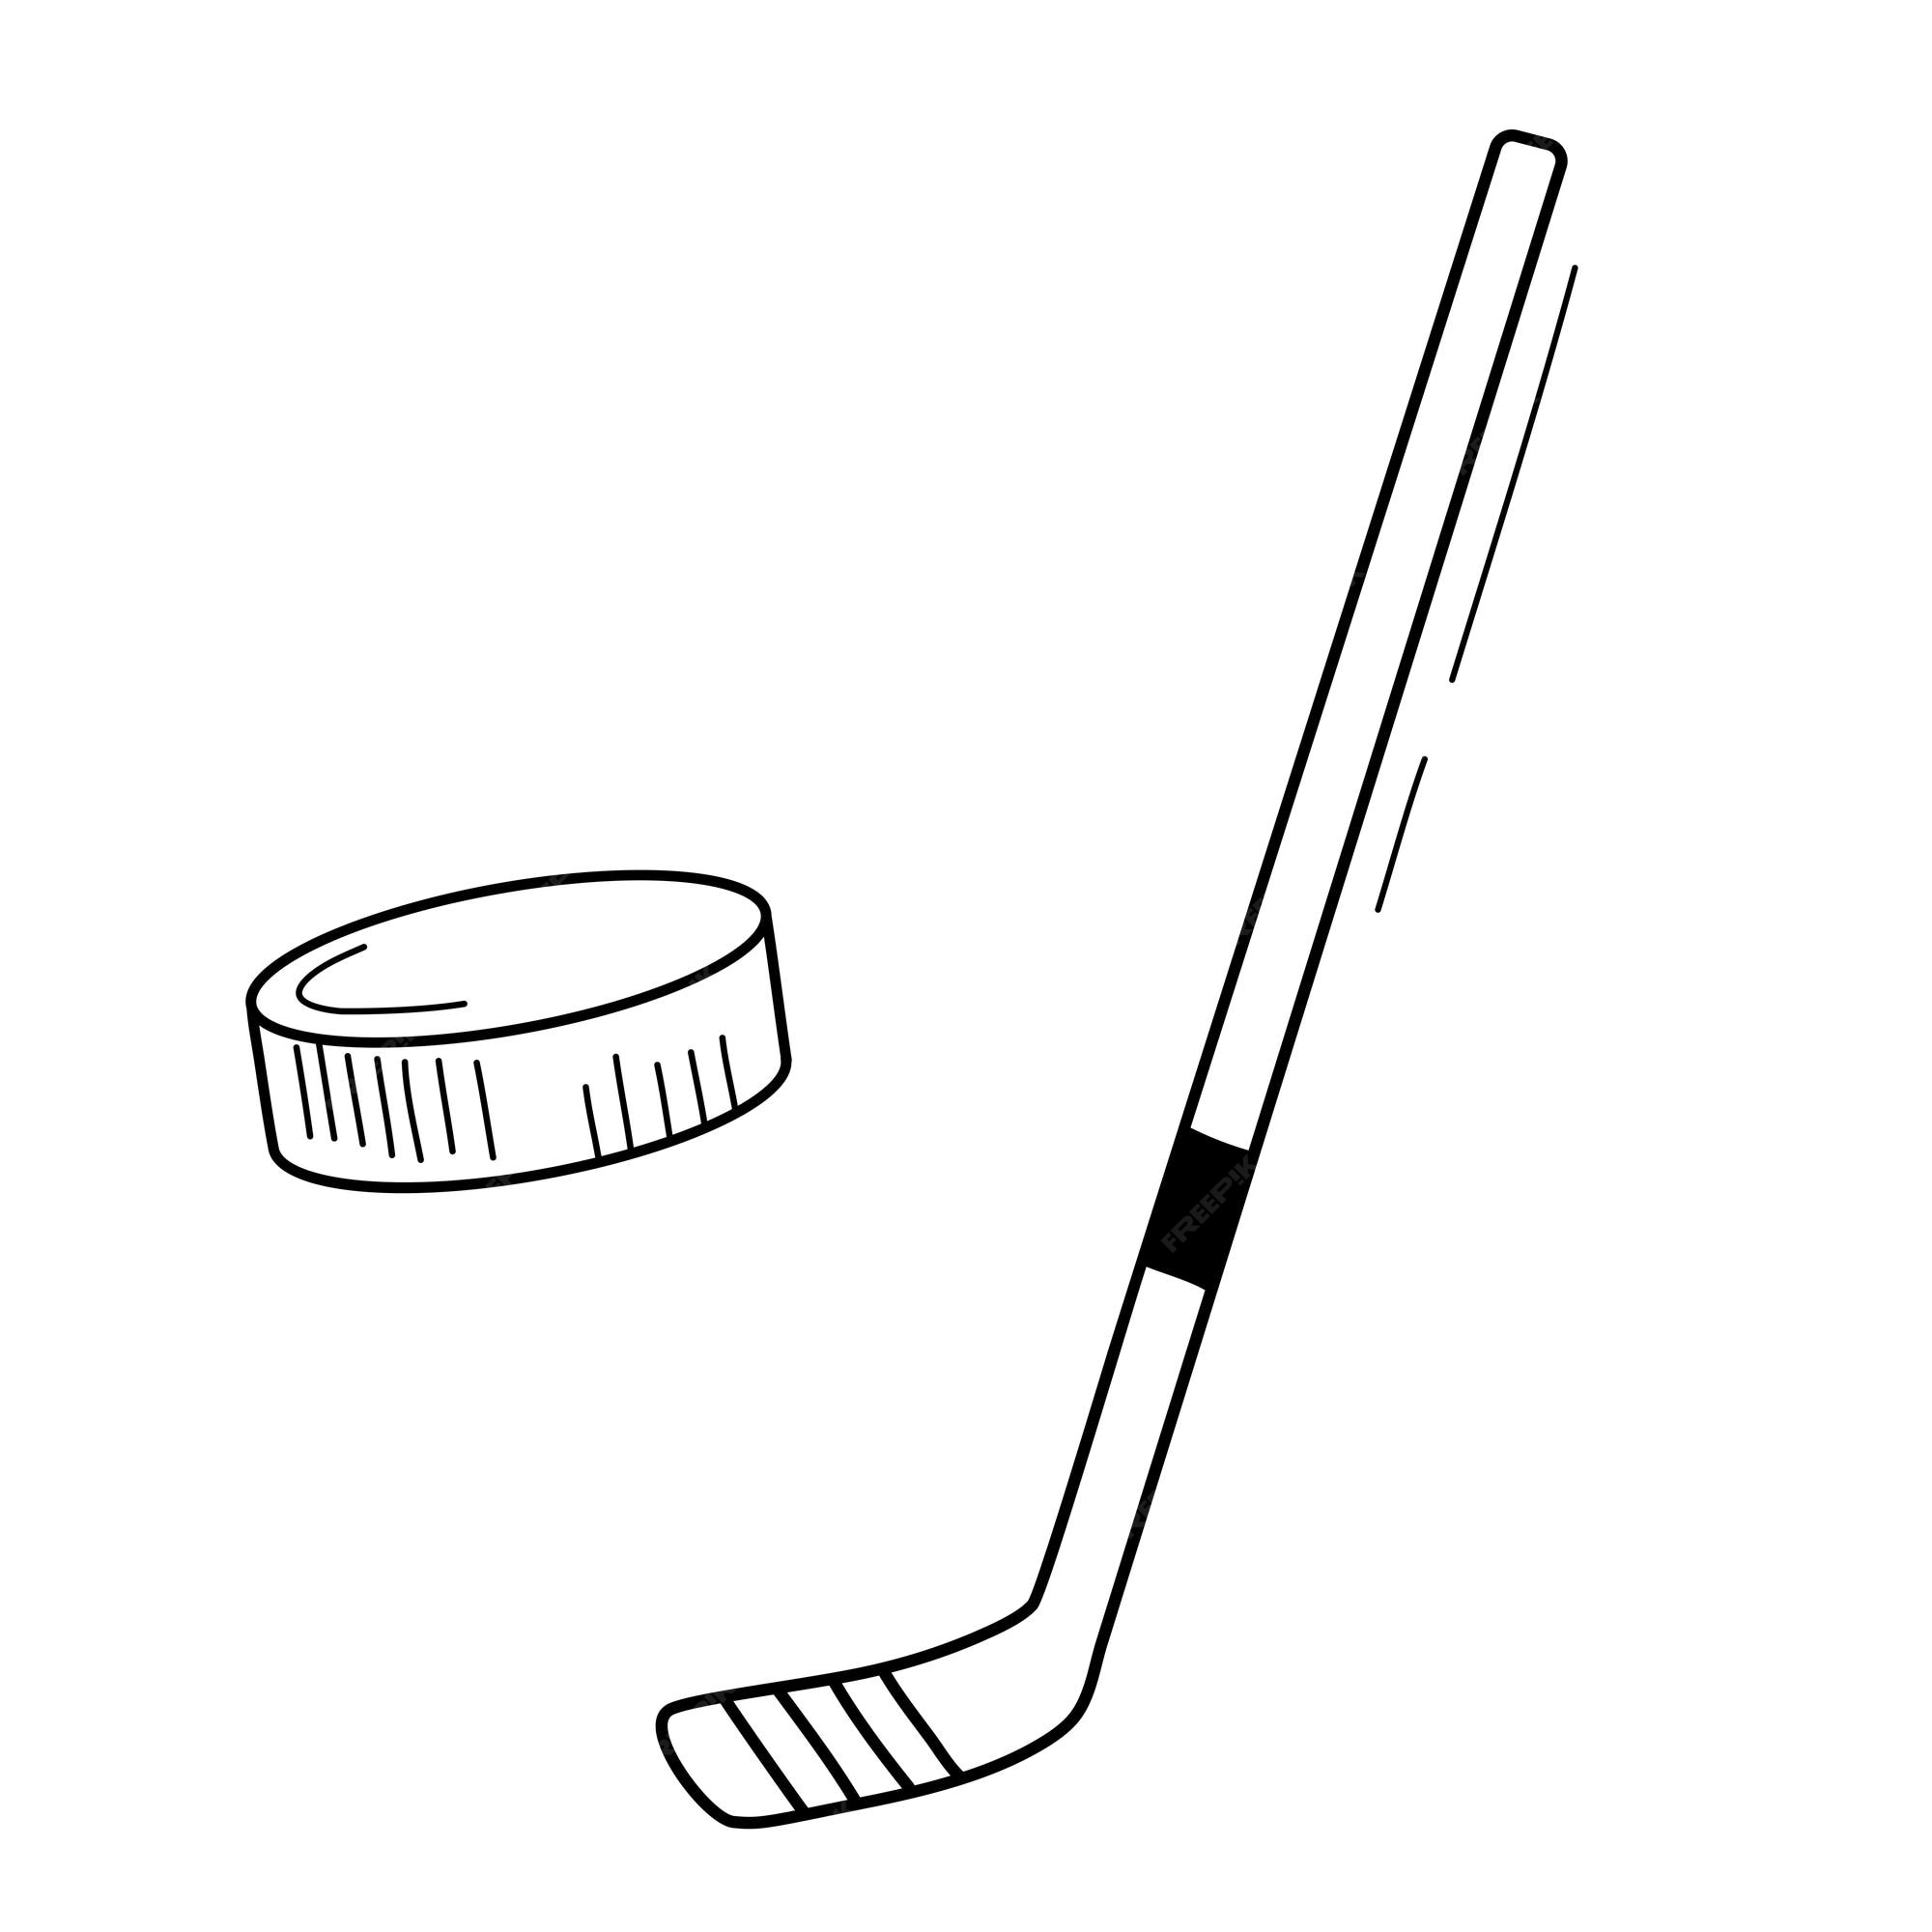 Premium vector hockey stick and puck set doodle vector illustration isolated on white background